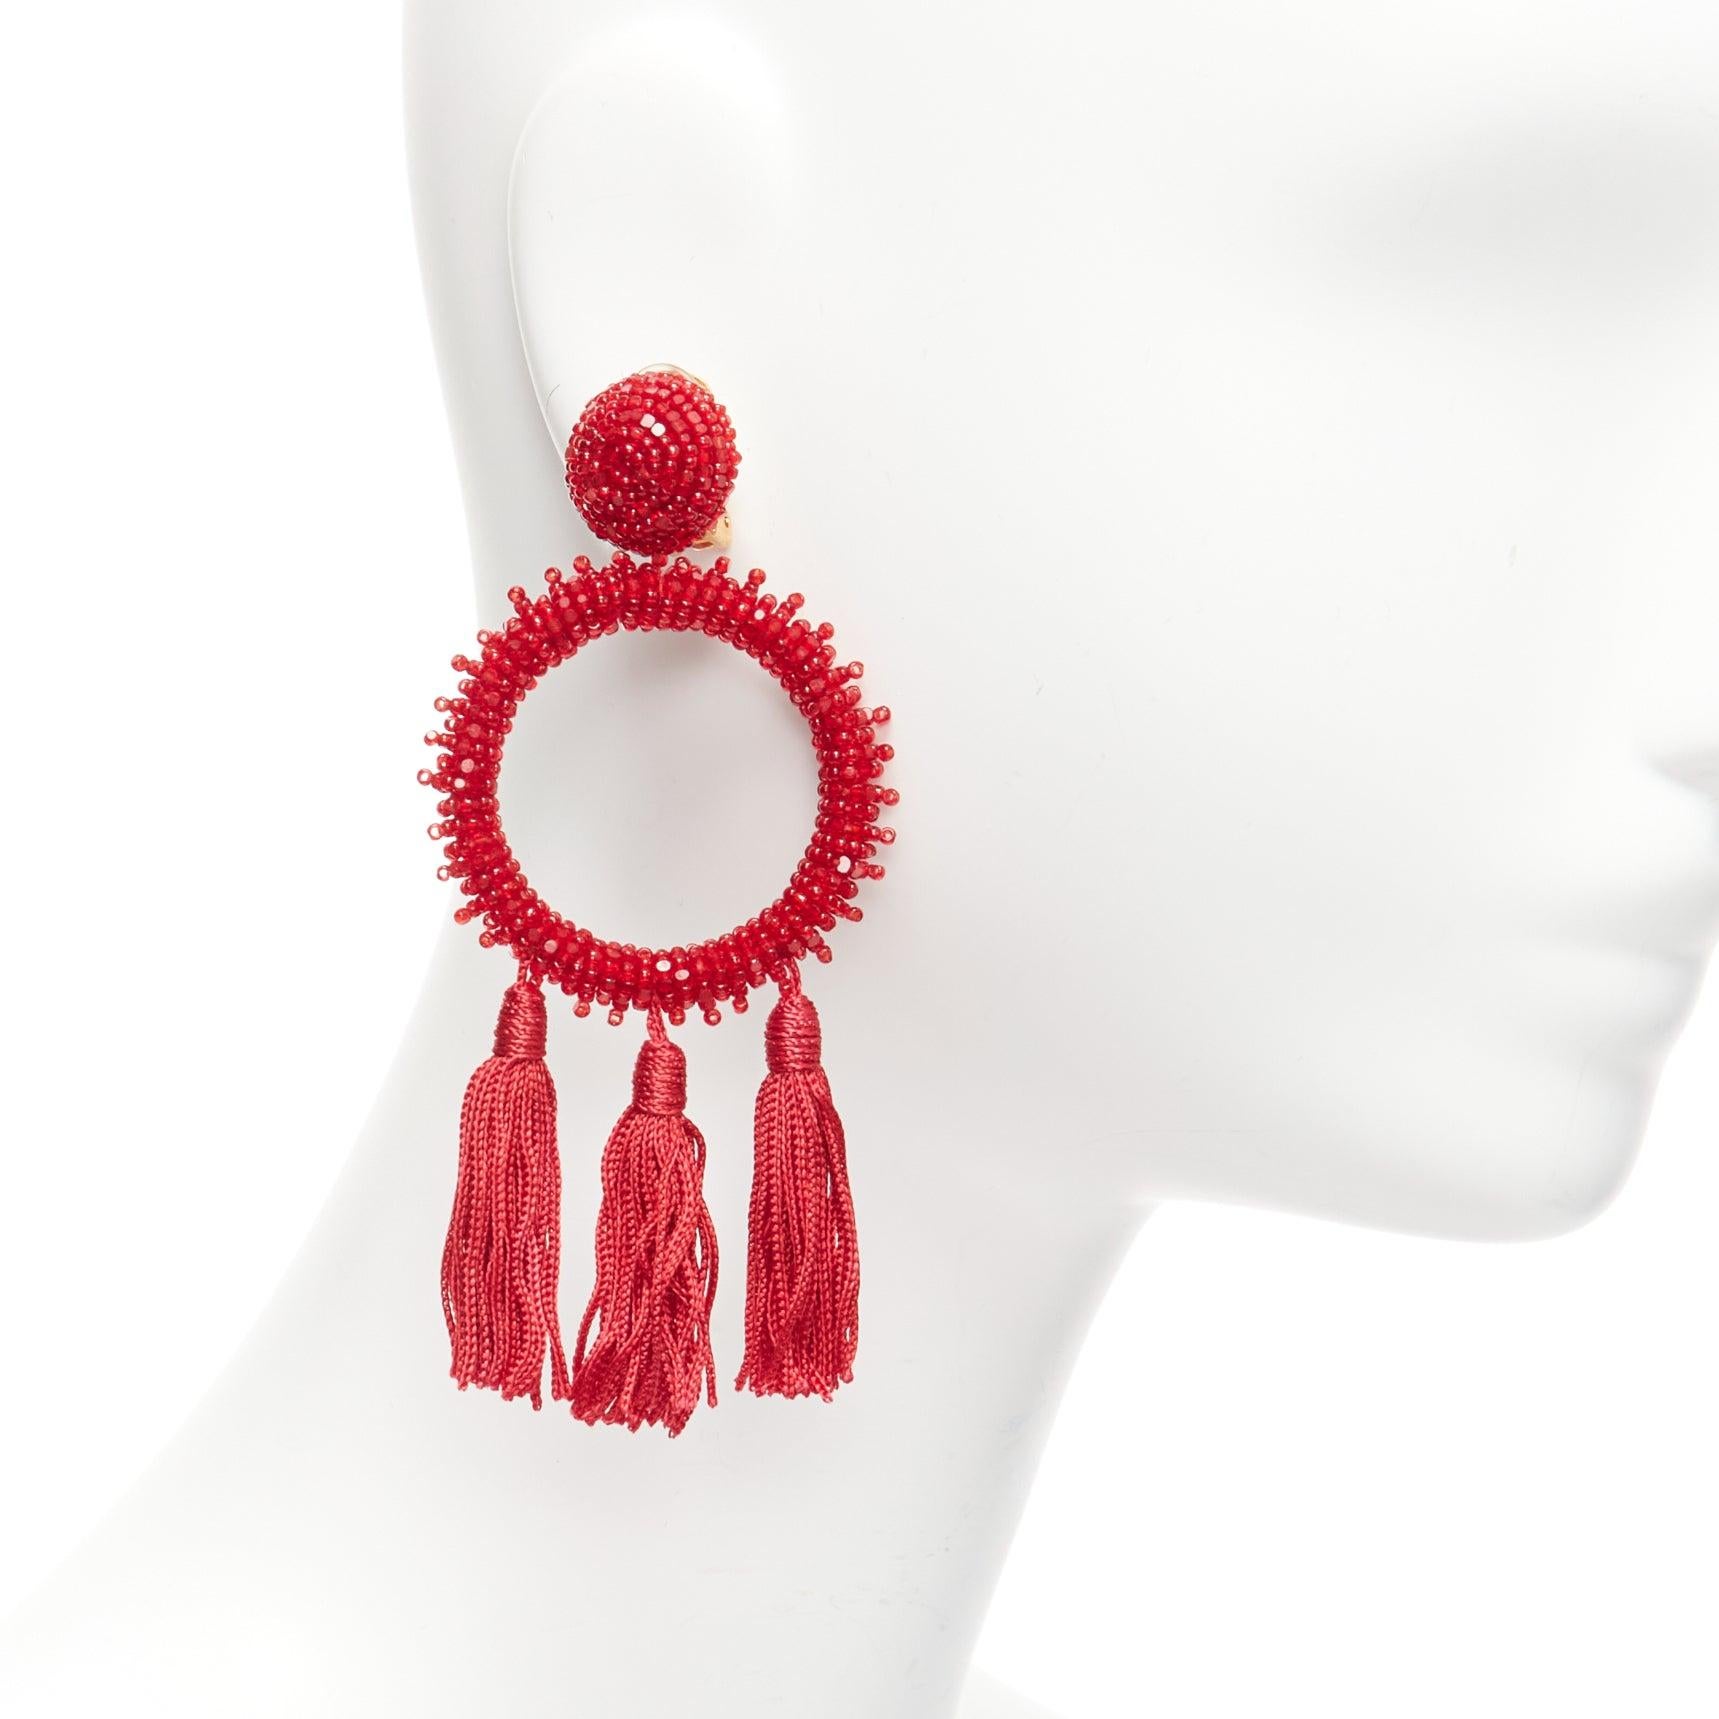 OSCAR DE LA RENTA red beaded tassel fringe circle hoop dangling clip on earrings pair
Reference: AAWC/A01052
Brand: Oscar de la Renta
Material: Fabric, Acrylic
Color: Red, Gold
Pattern: Solid
Closure: Clip On
Lining: Gold Metal
Made in: